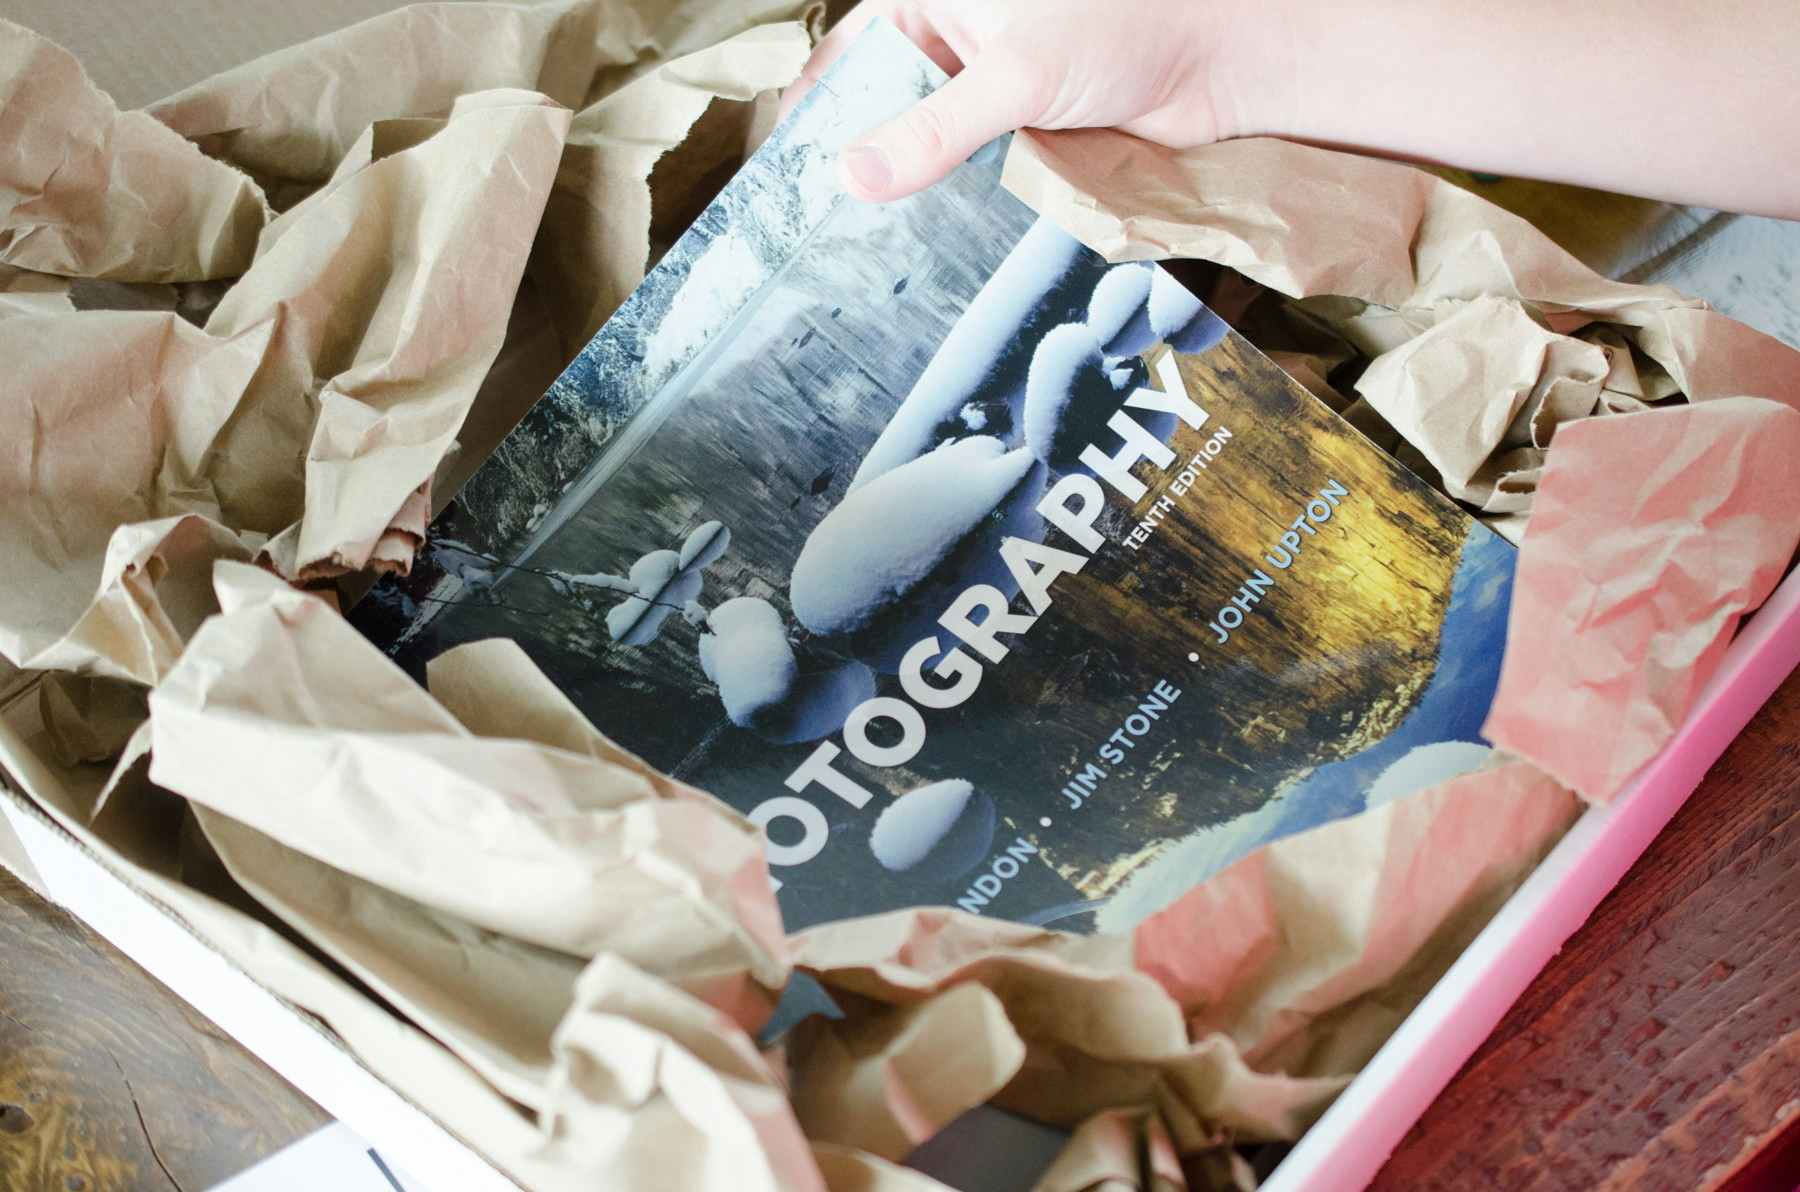 A person taking a photography book out of a box.